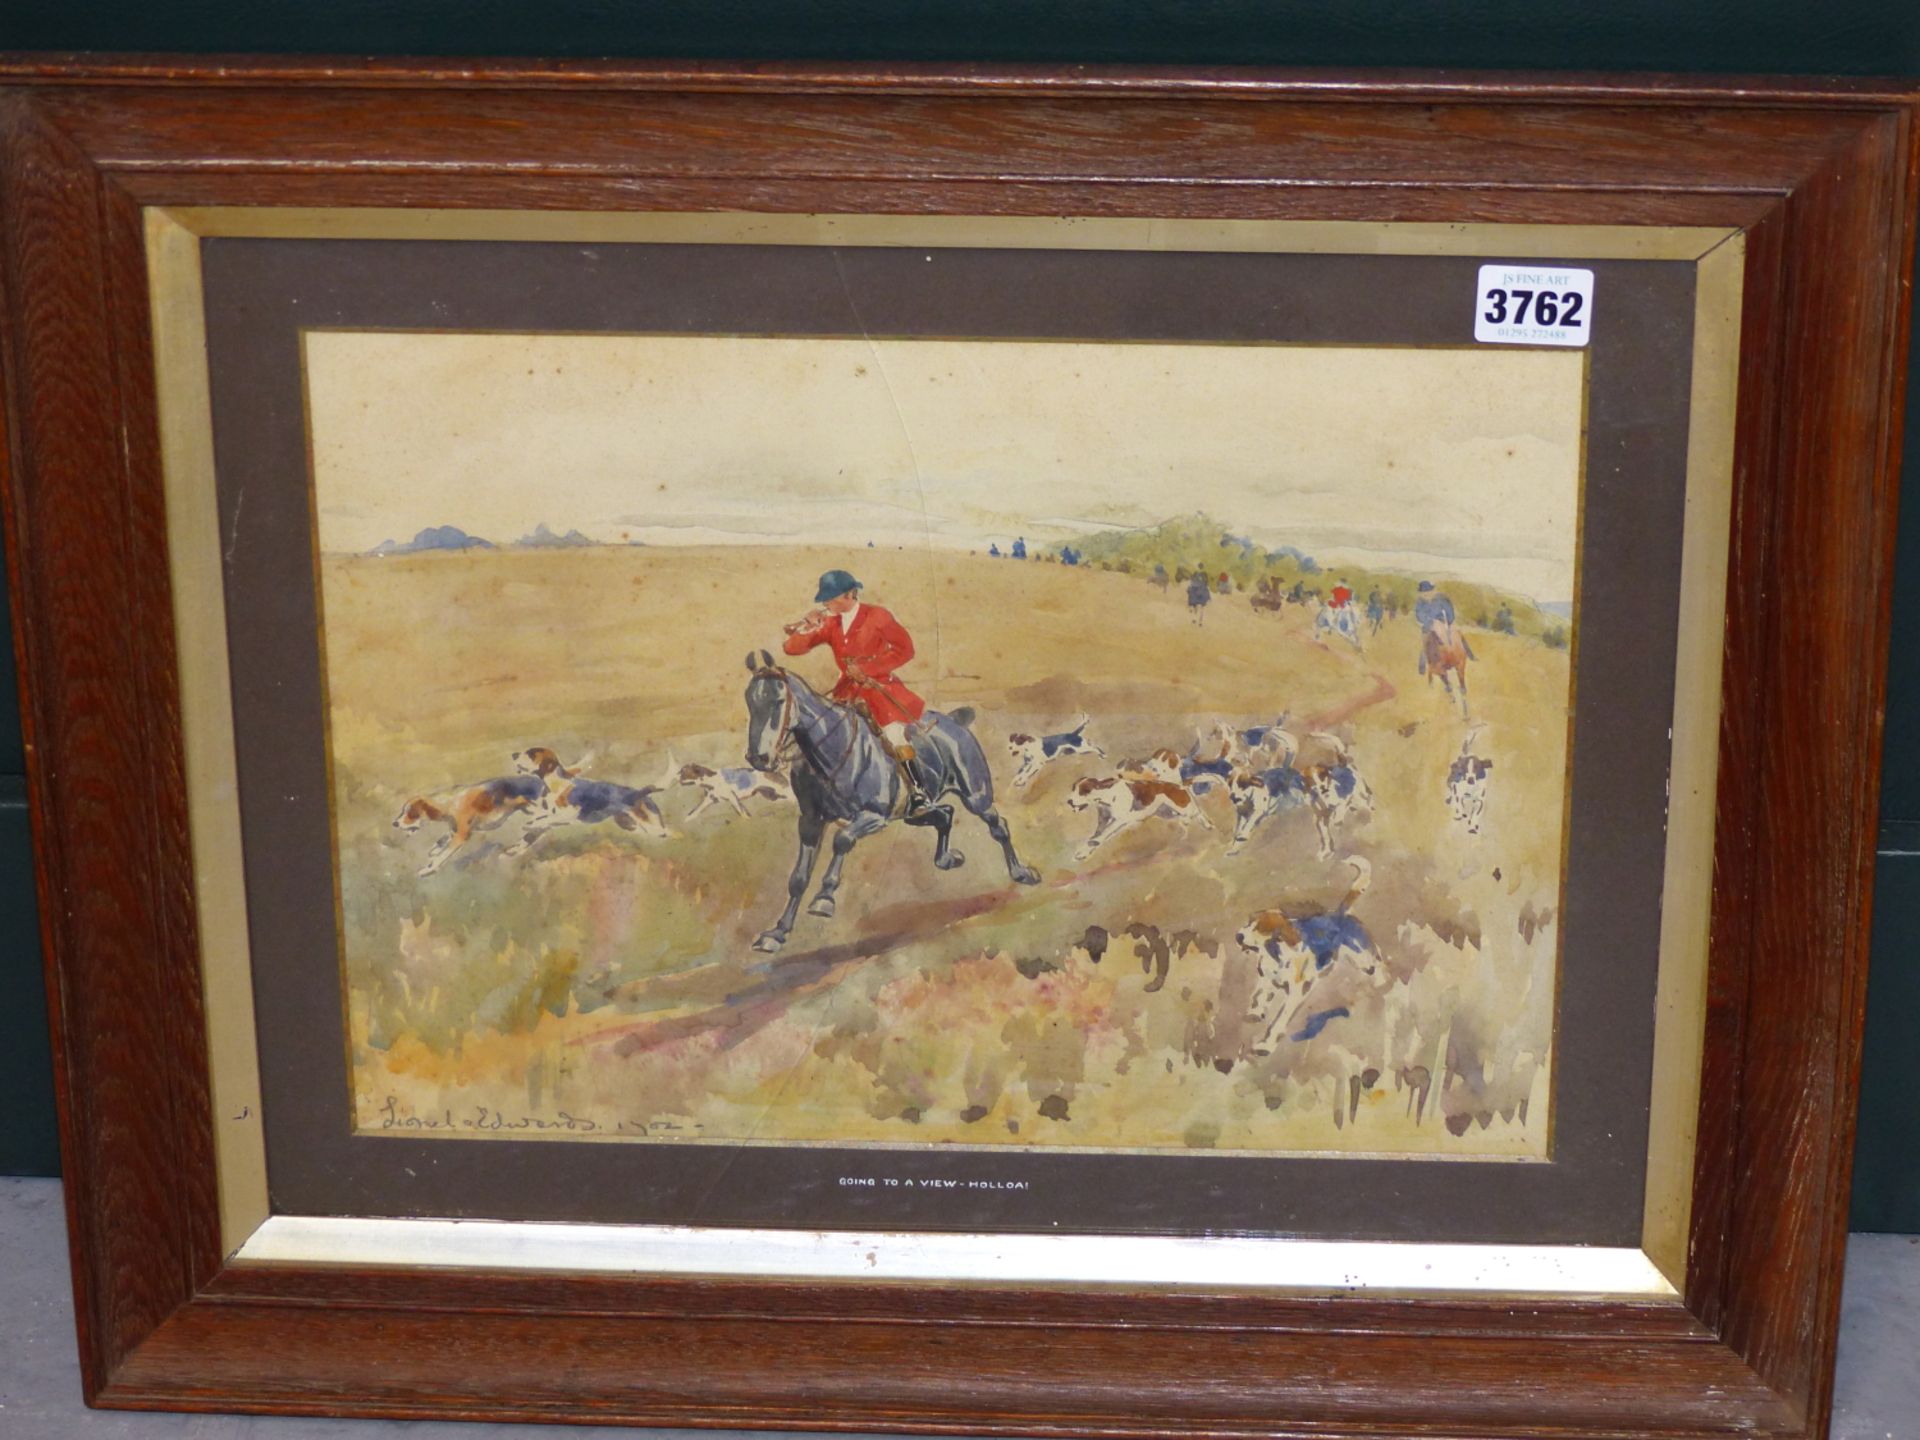 LIONEL EDWARDS (1878-1966) ARR. GOING TO A VIEW -HOLLOA!. WATERCOLOUR, SIGNED AND DATED 1902 LOWER - Image 4 of 7